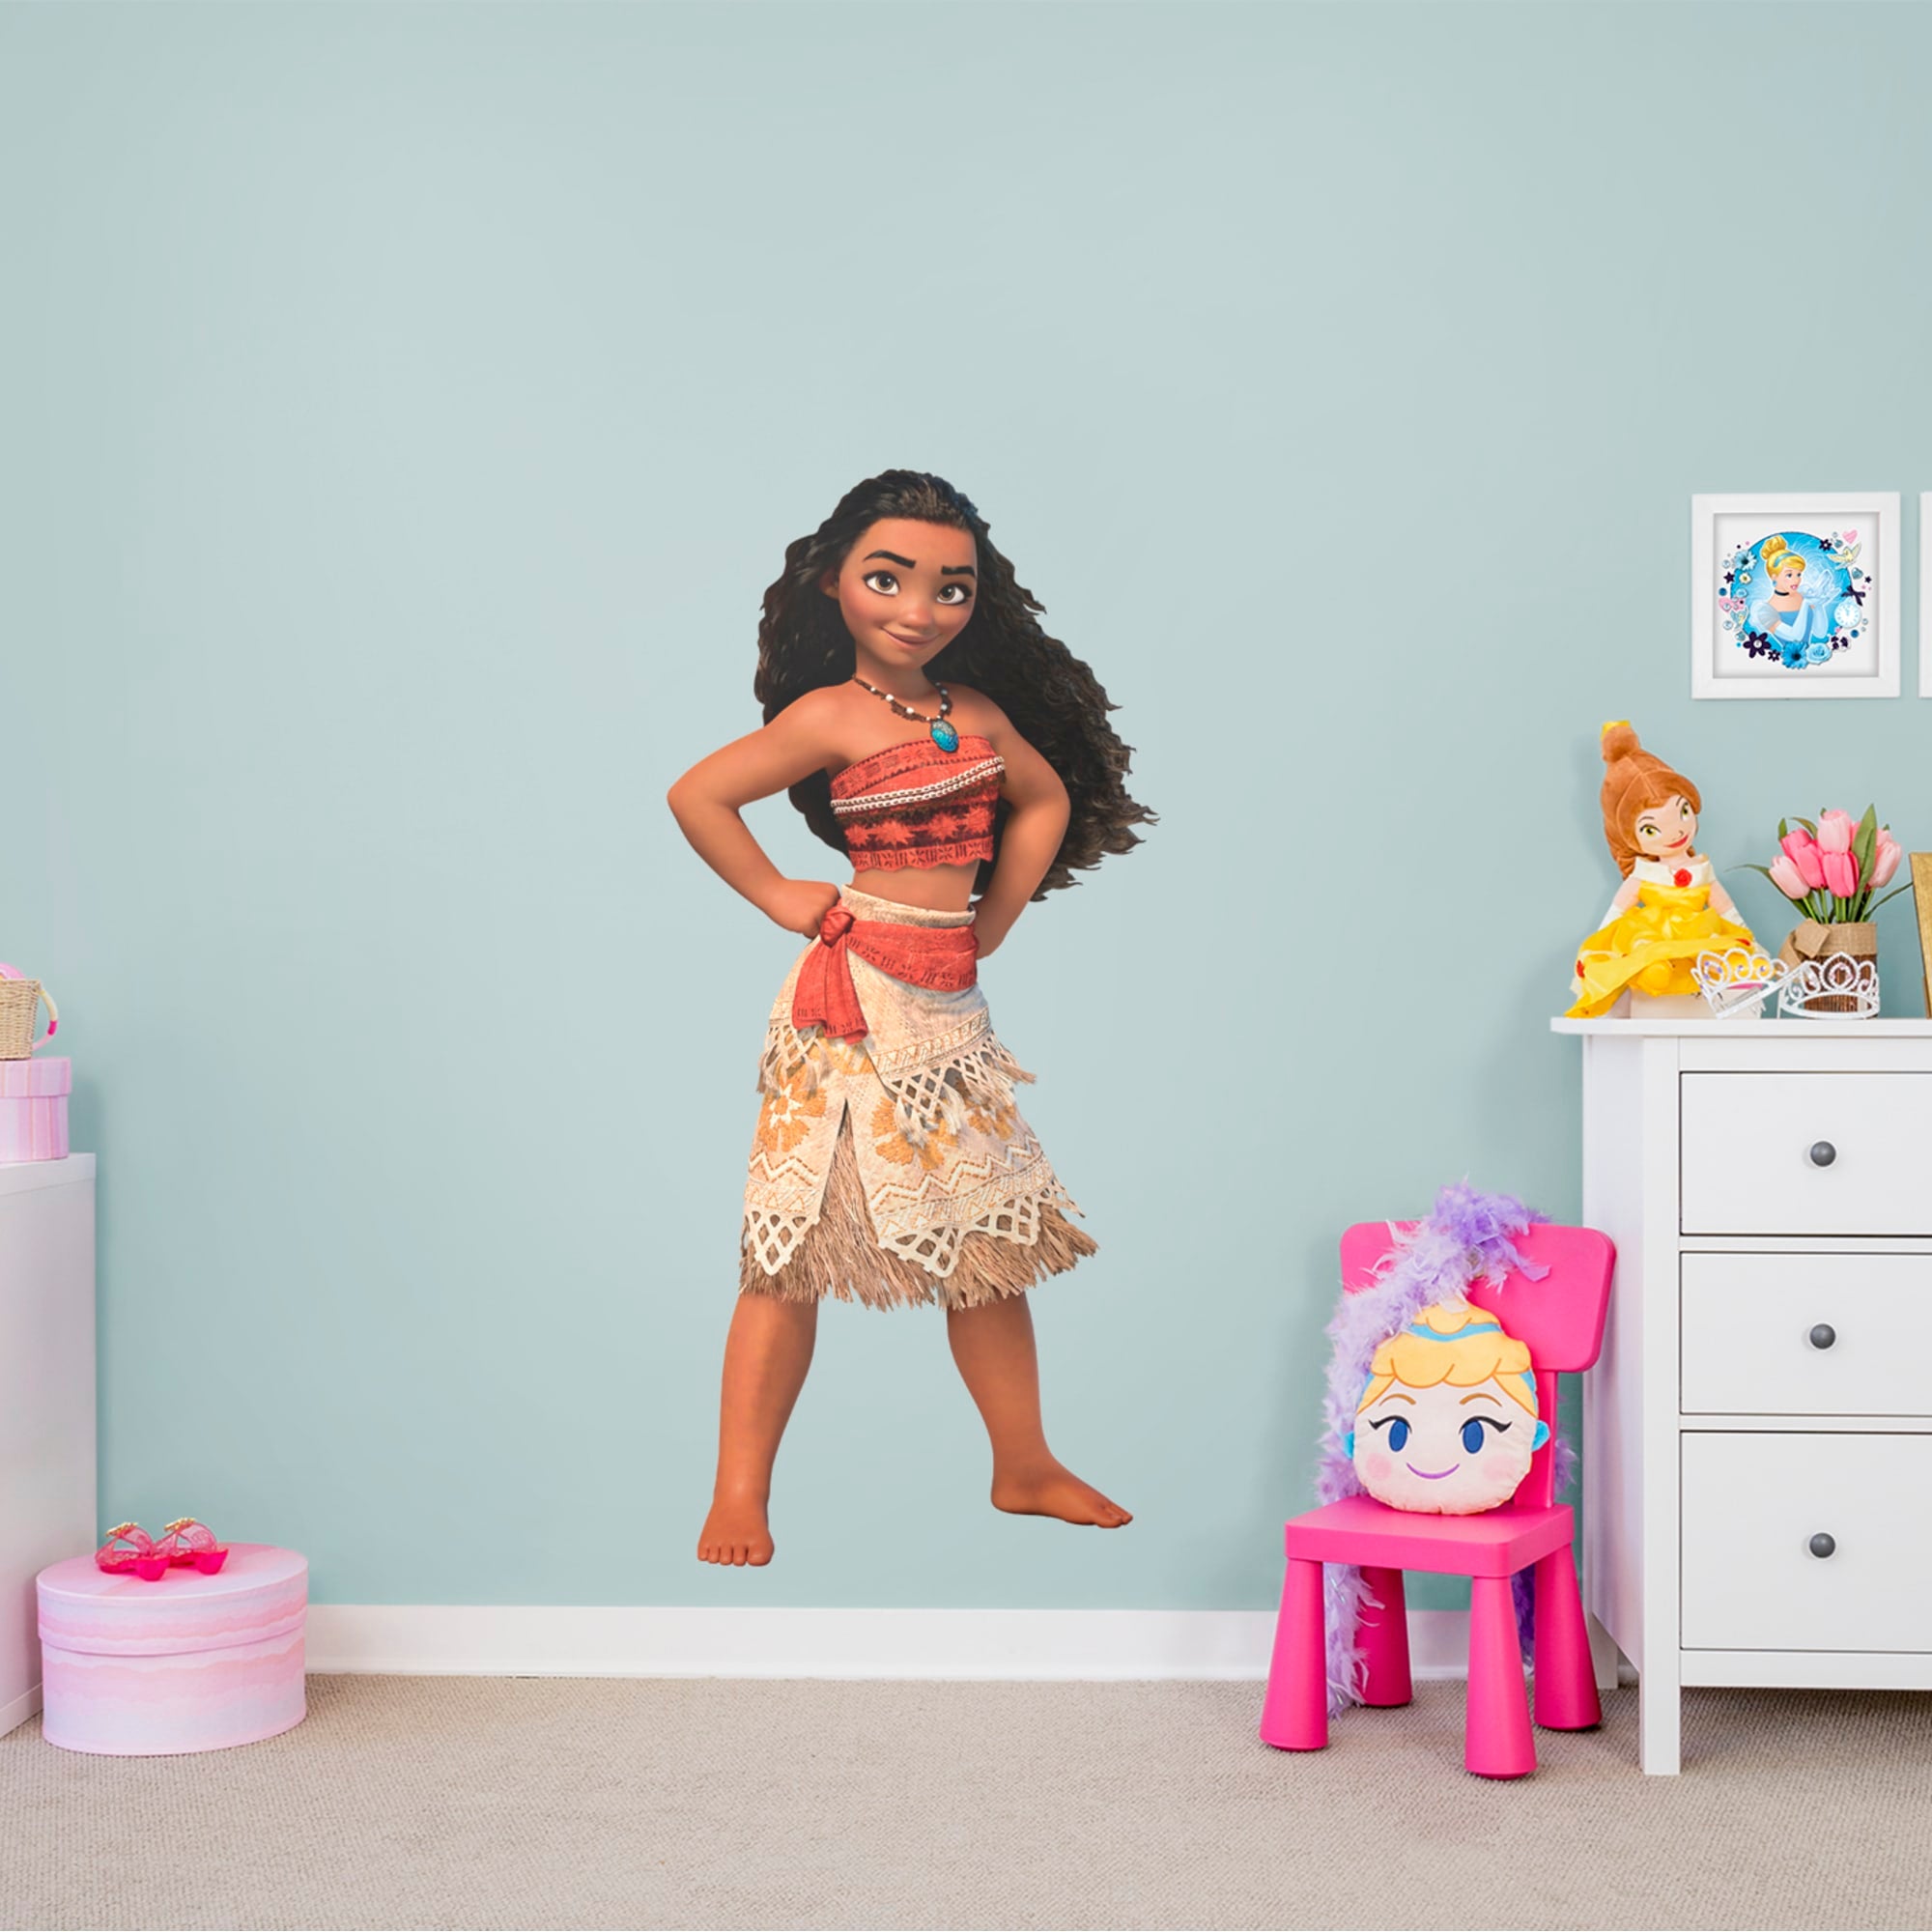 Moana - Officially Licensed Disney Removable Wall Decal 29.0"W x 64.0"H by Fathead | Vinyl